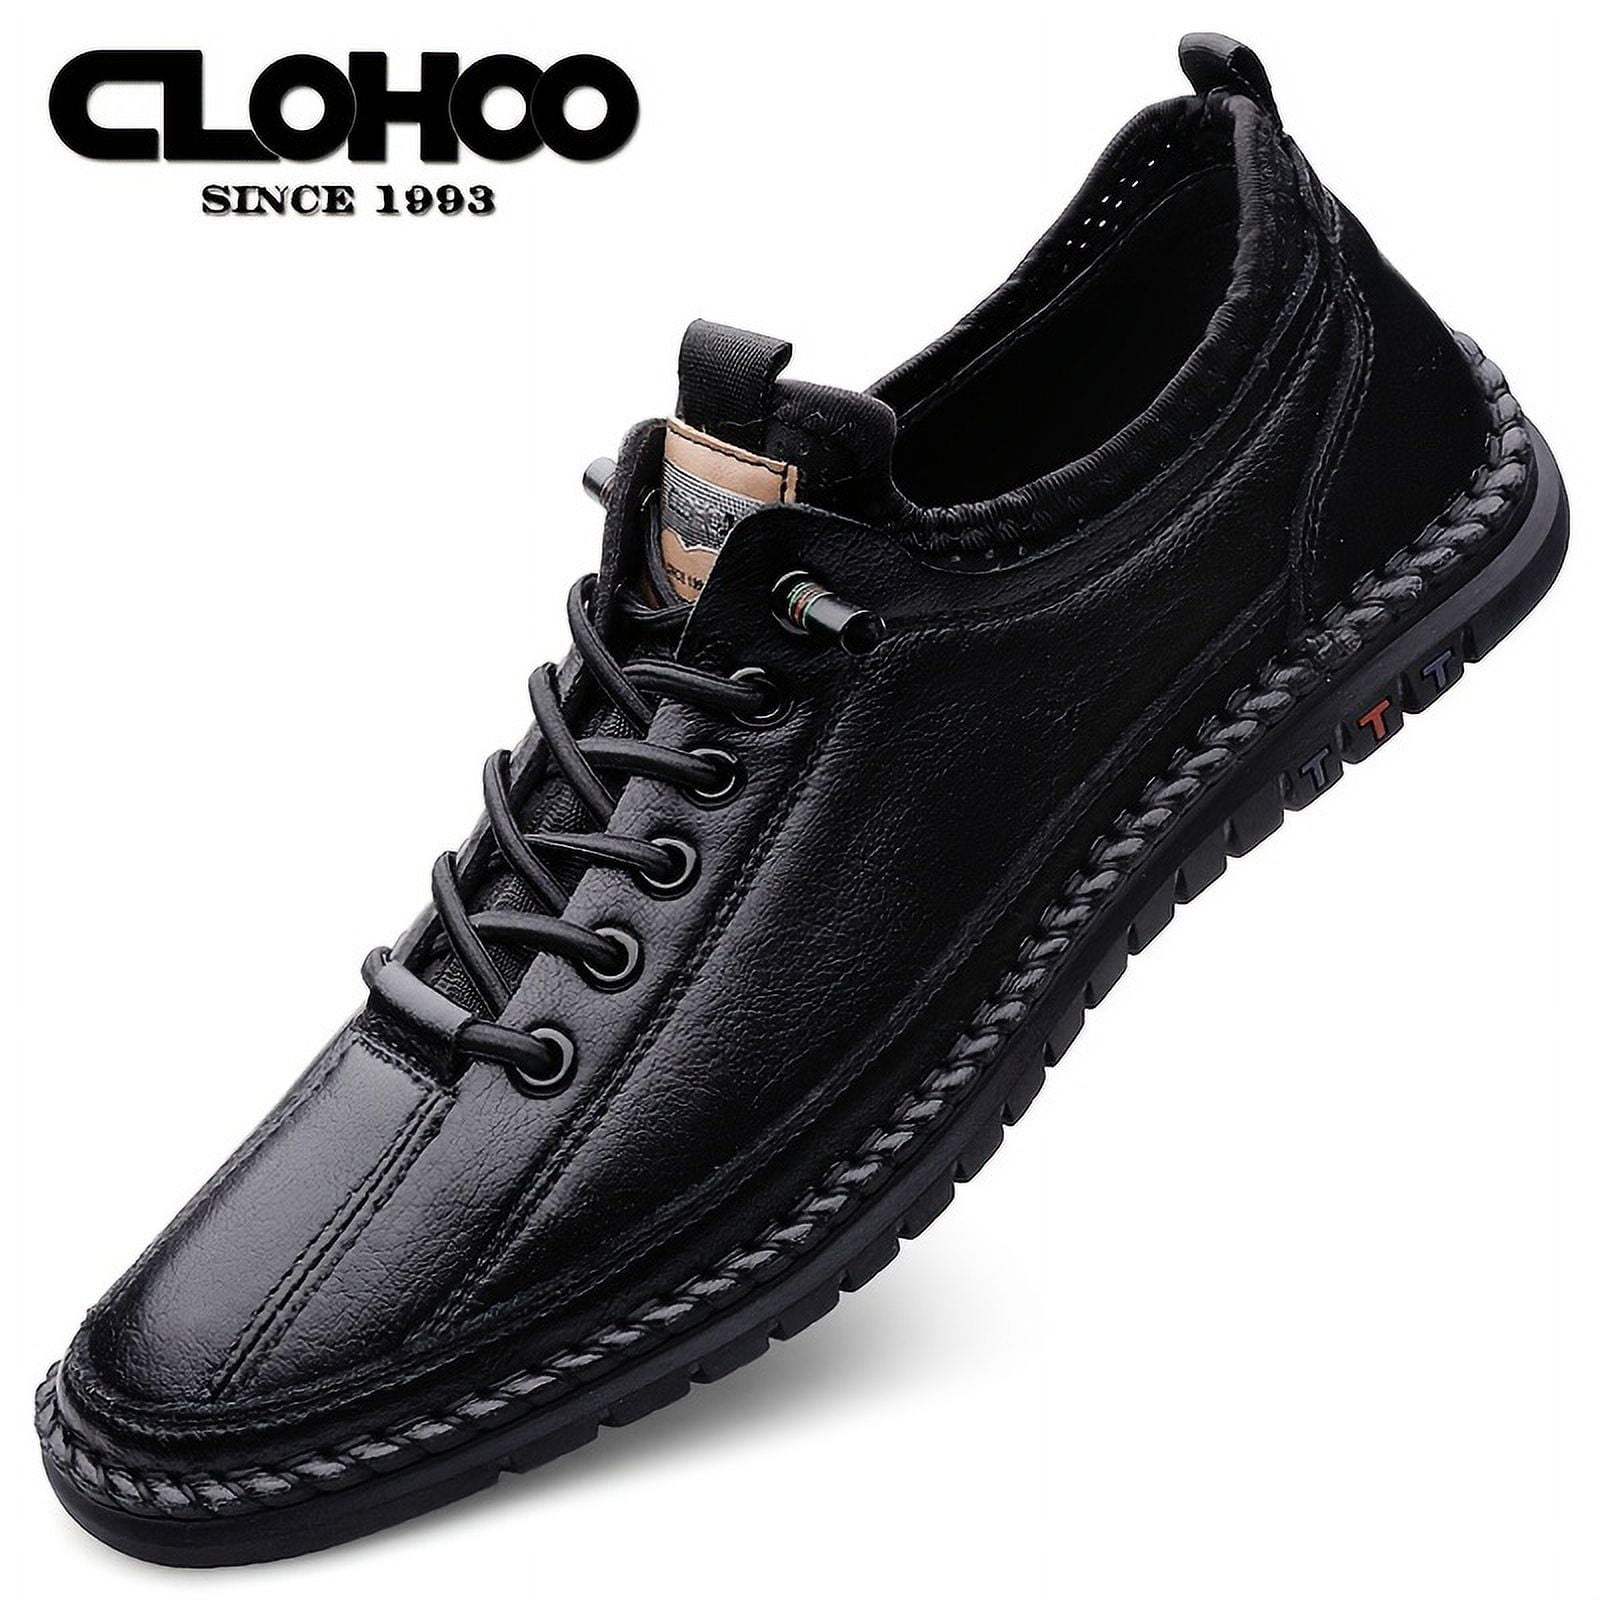 CLOHOO Men's Genuine Leather Shoes, Lace Up Rubber Sole Hand-sewn ...